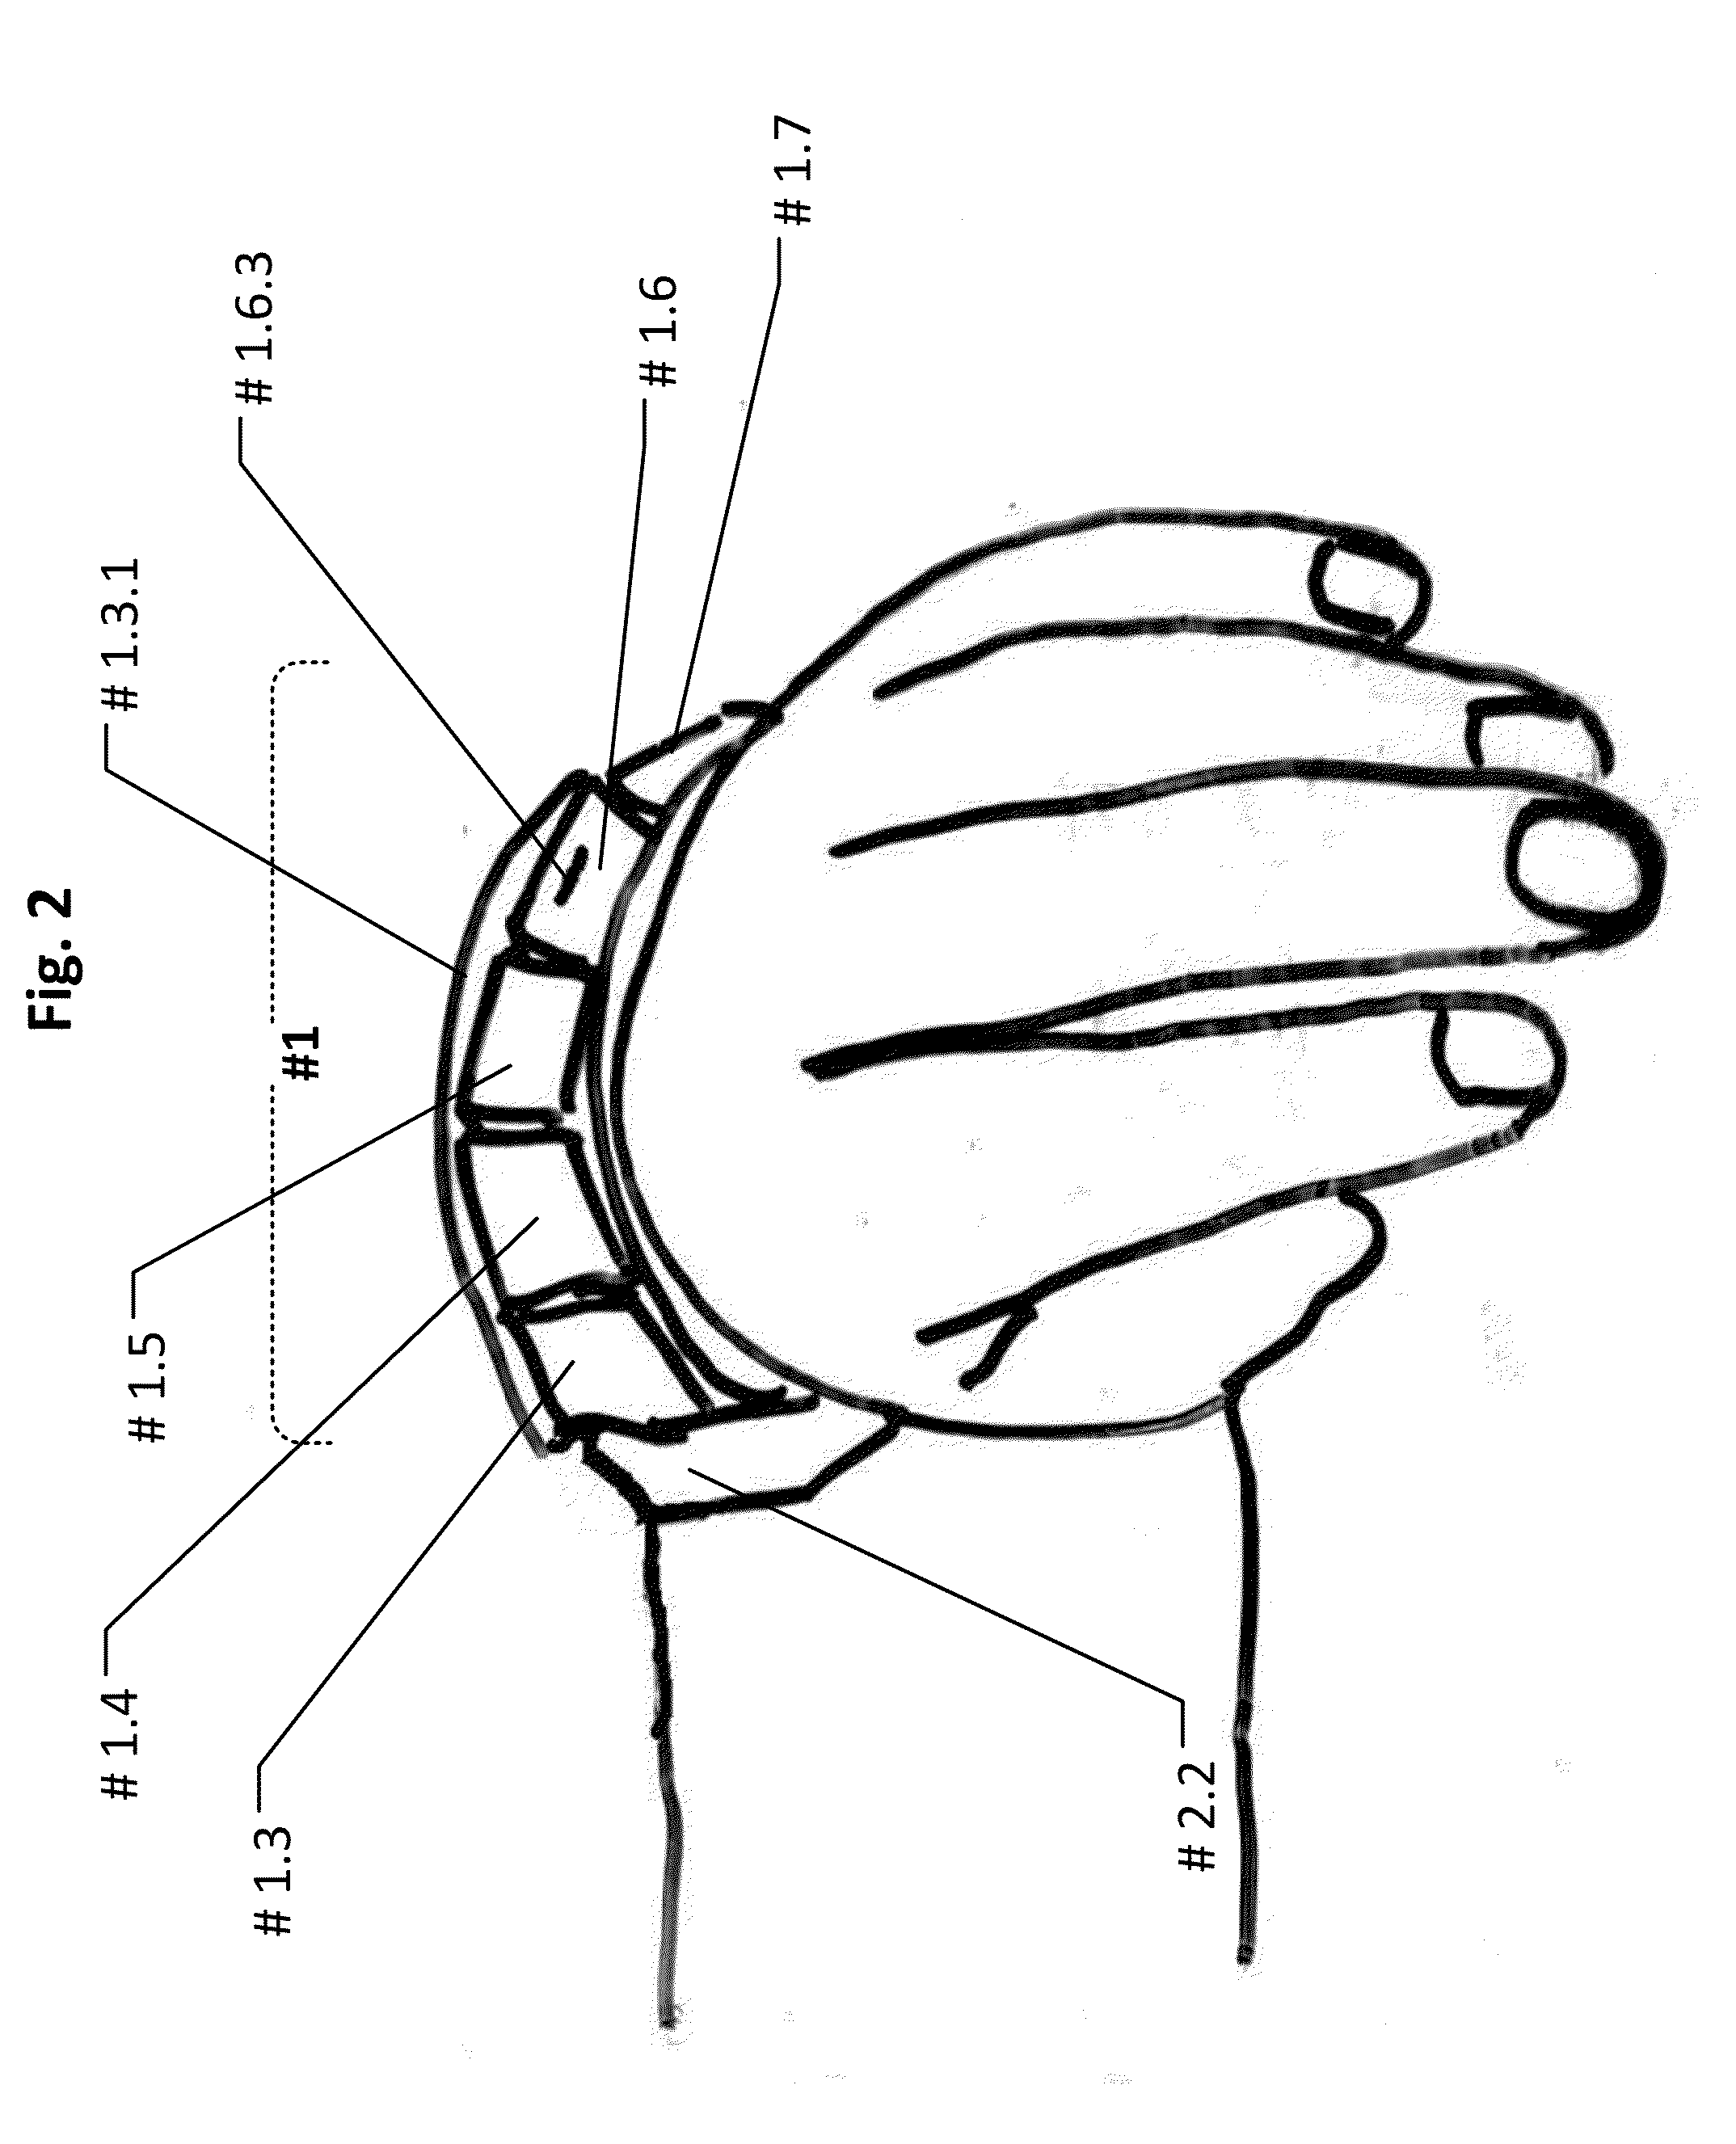 Wearable communication device, security complex and user interface